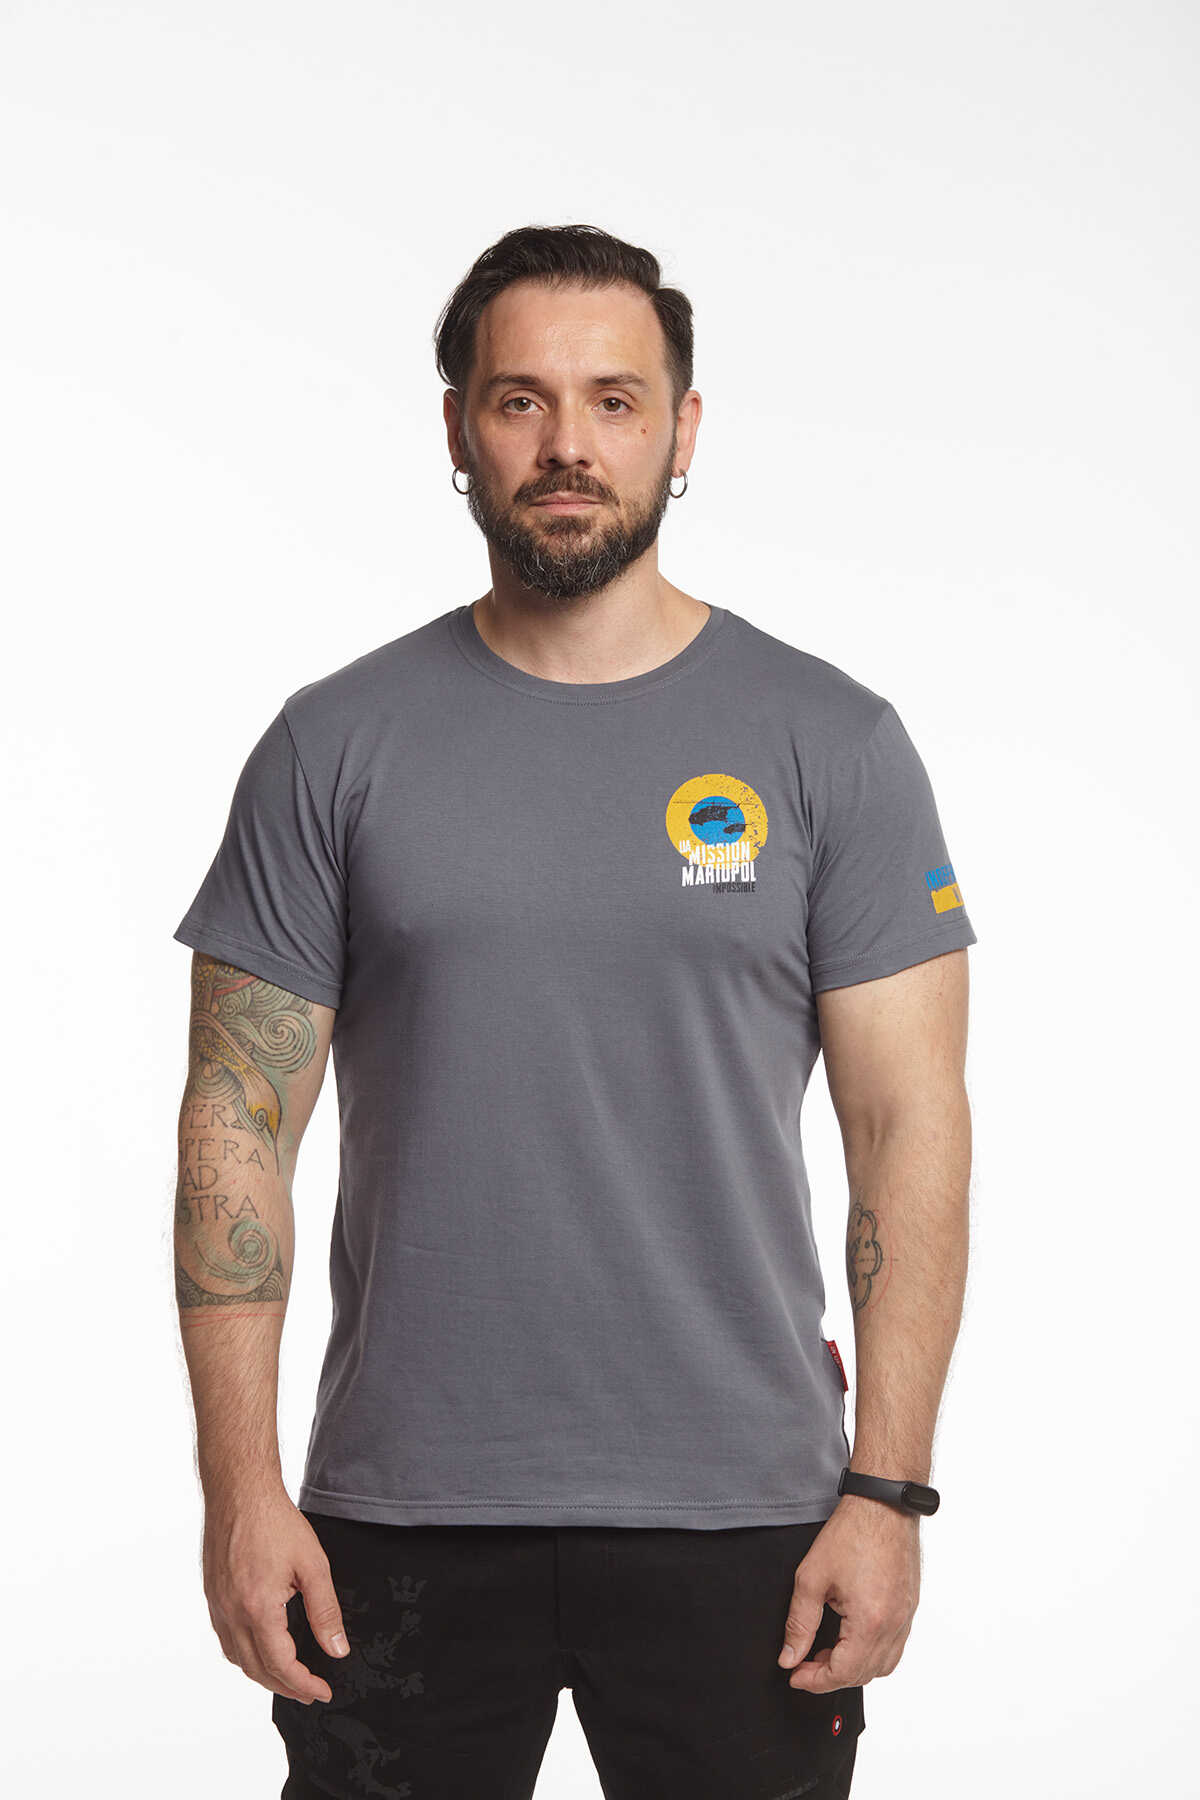 Men's T-Shirt Mission Mariupol. Color gray. Bonuses and discounts are not applied to this item.